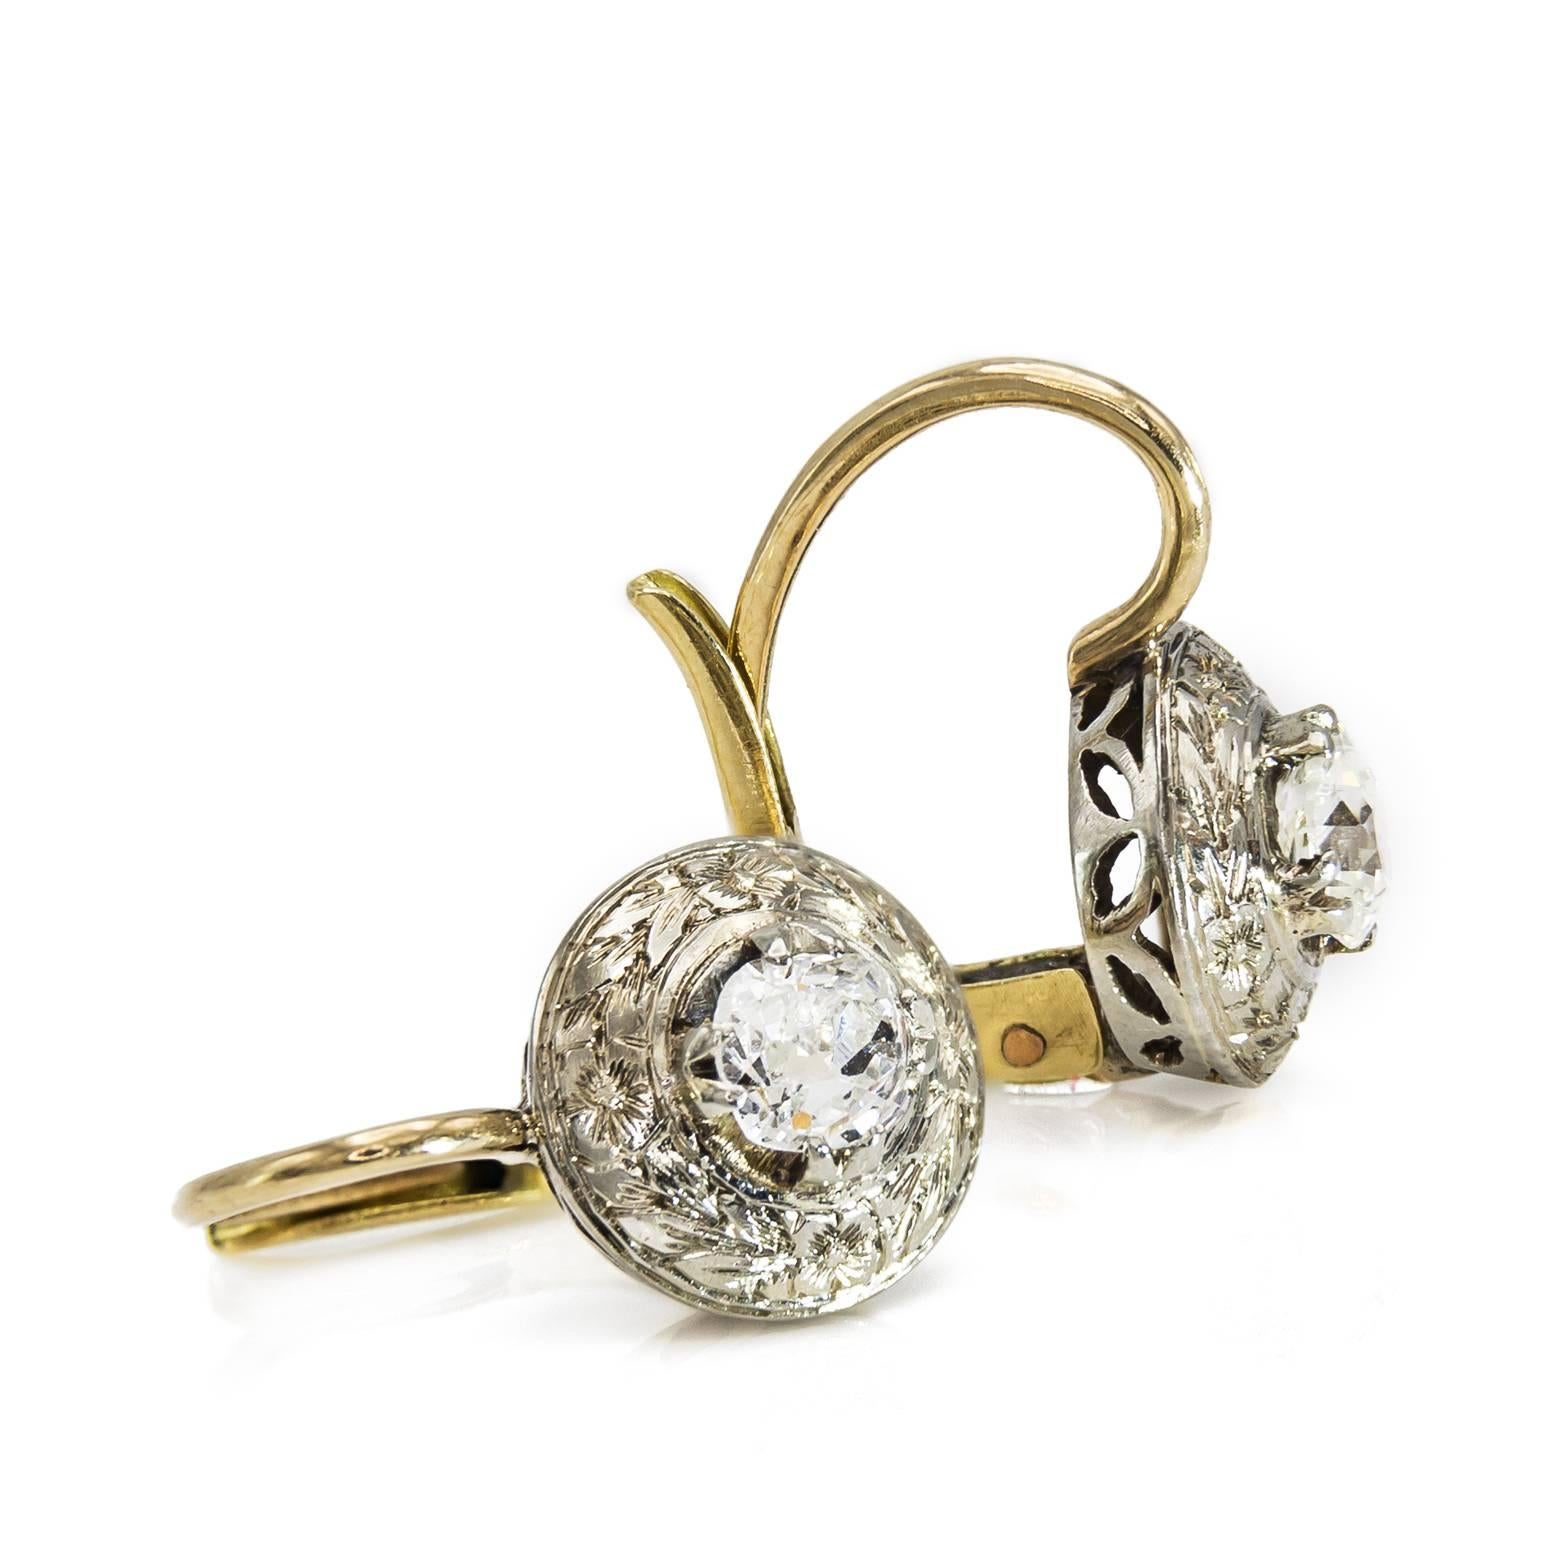 Post-War Round Diamond Earrings with a Halo of Engraved White Gold